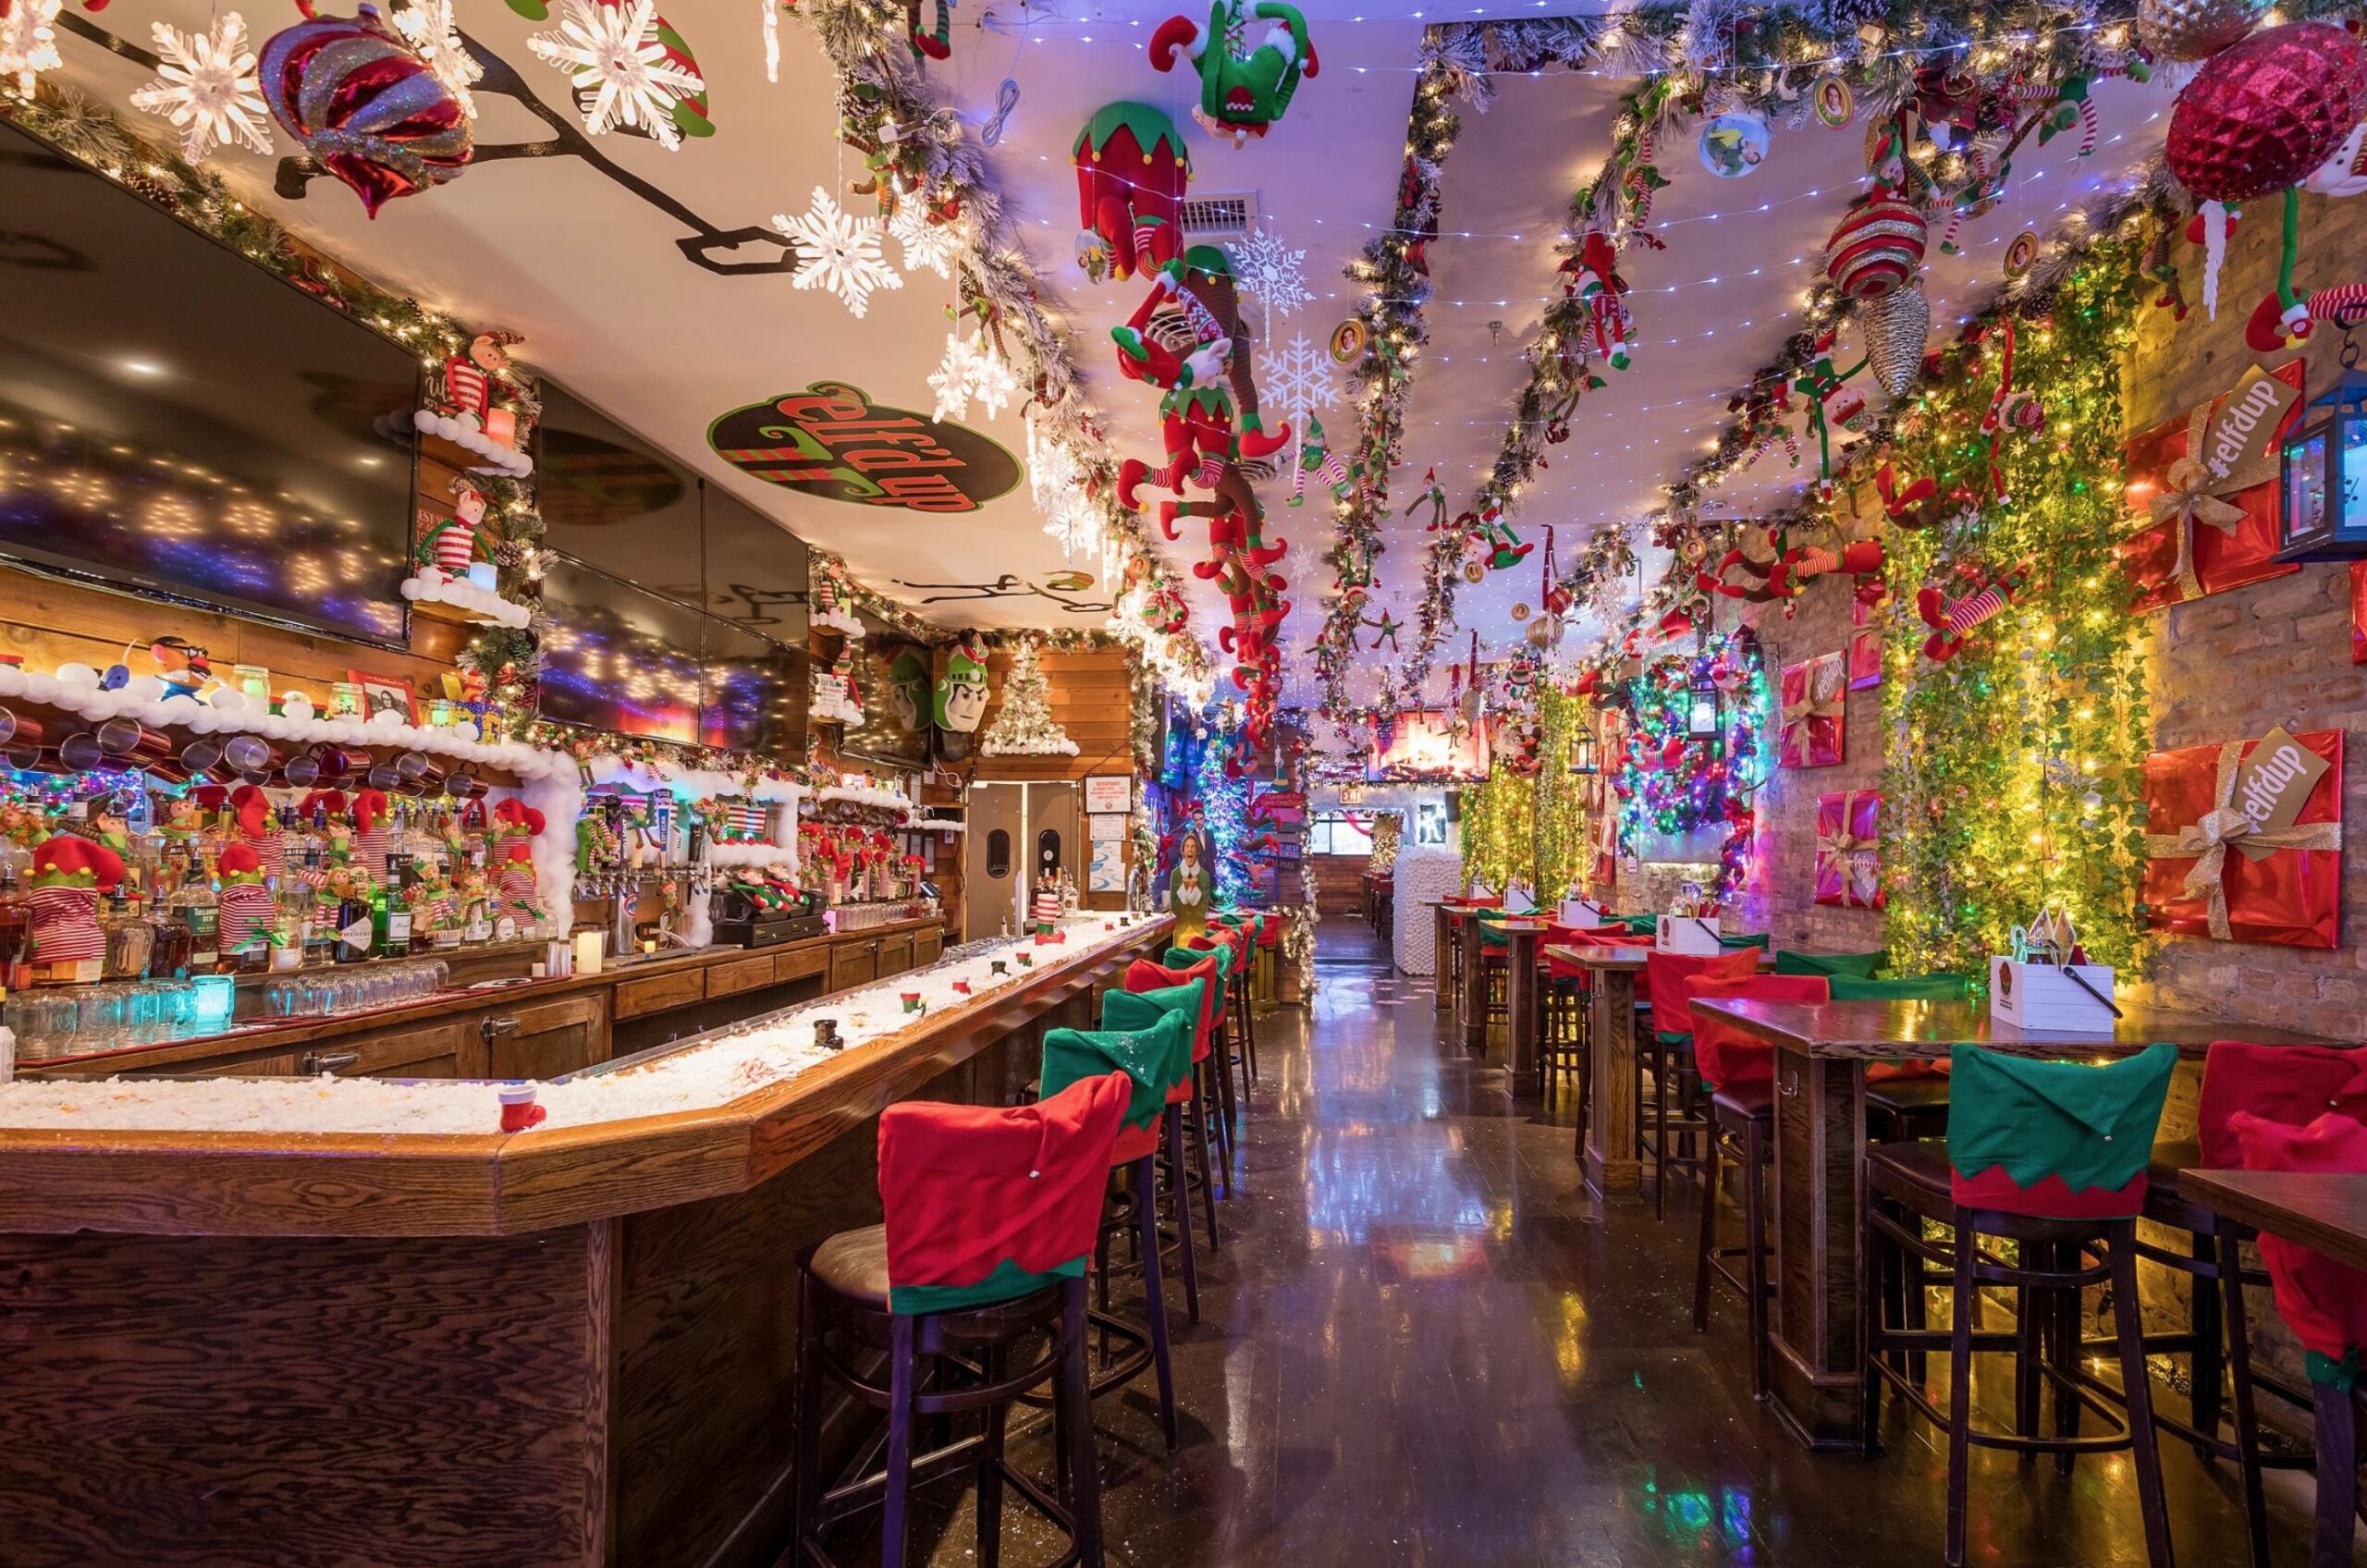 Stretch Bar and Grill transforms into Elf’d Up with its festively decorated bar